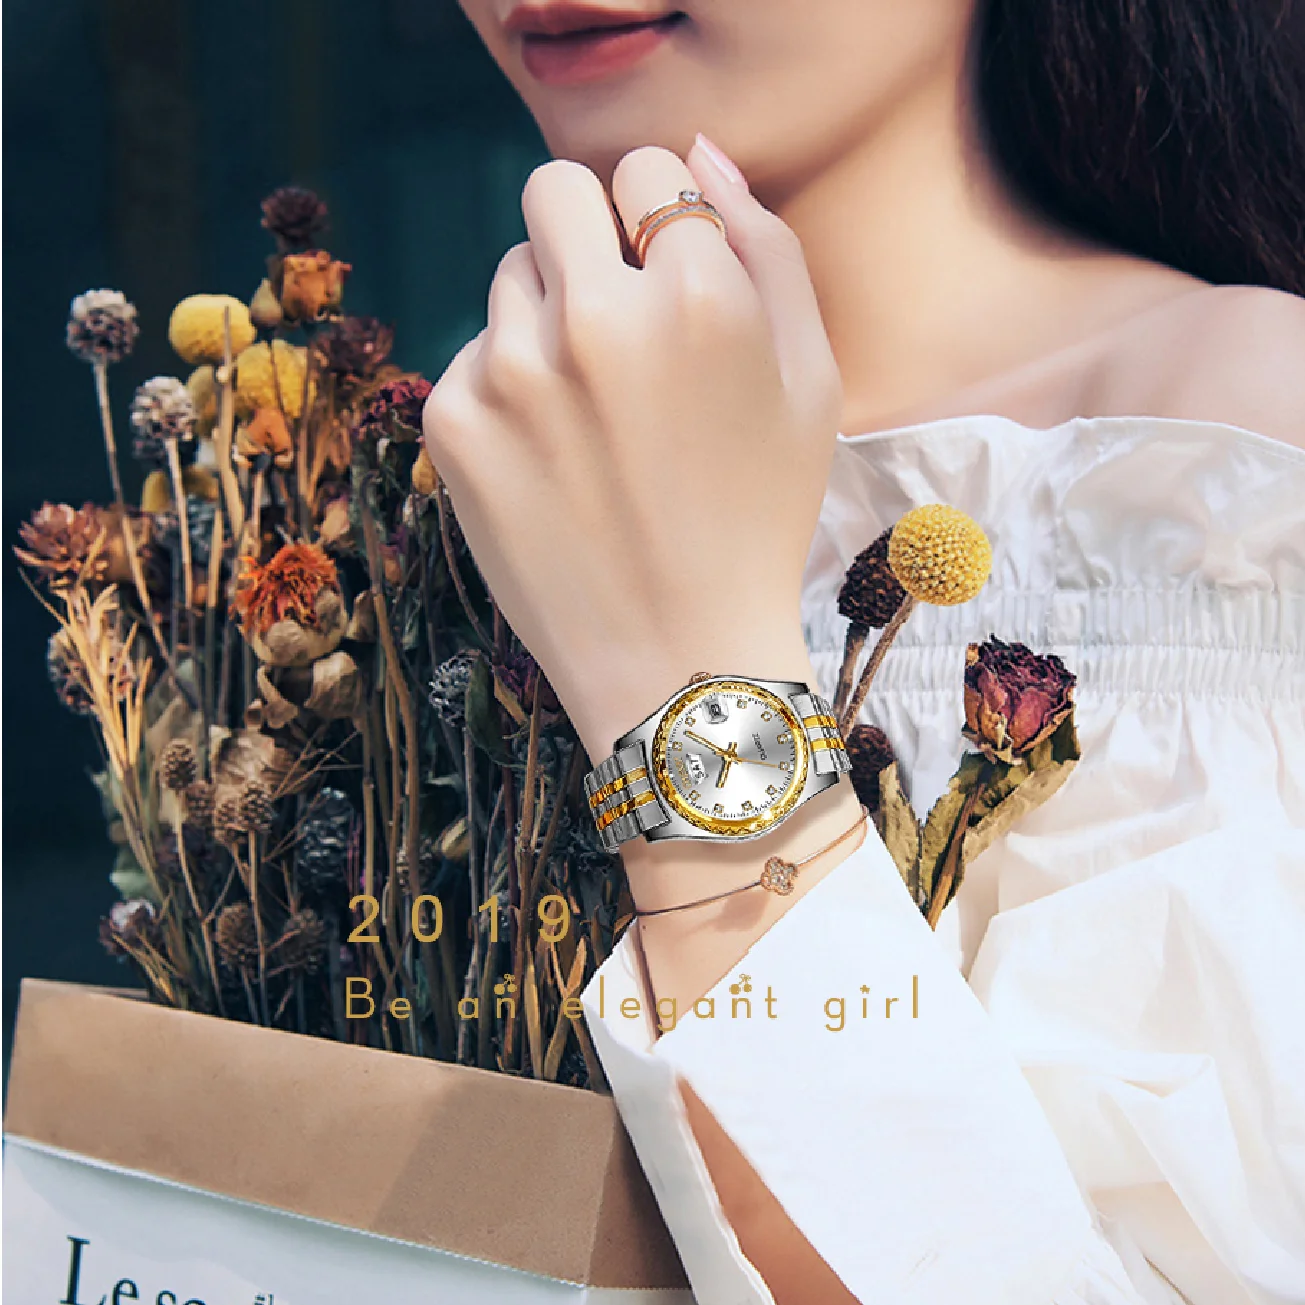 CHENXI Women Luxury Quartz Watches Ladies Golden Stainless Steel Wrist Watch High Quality Casual Waterproof Watch Gift for Wife enlarge